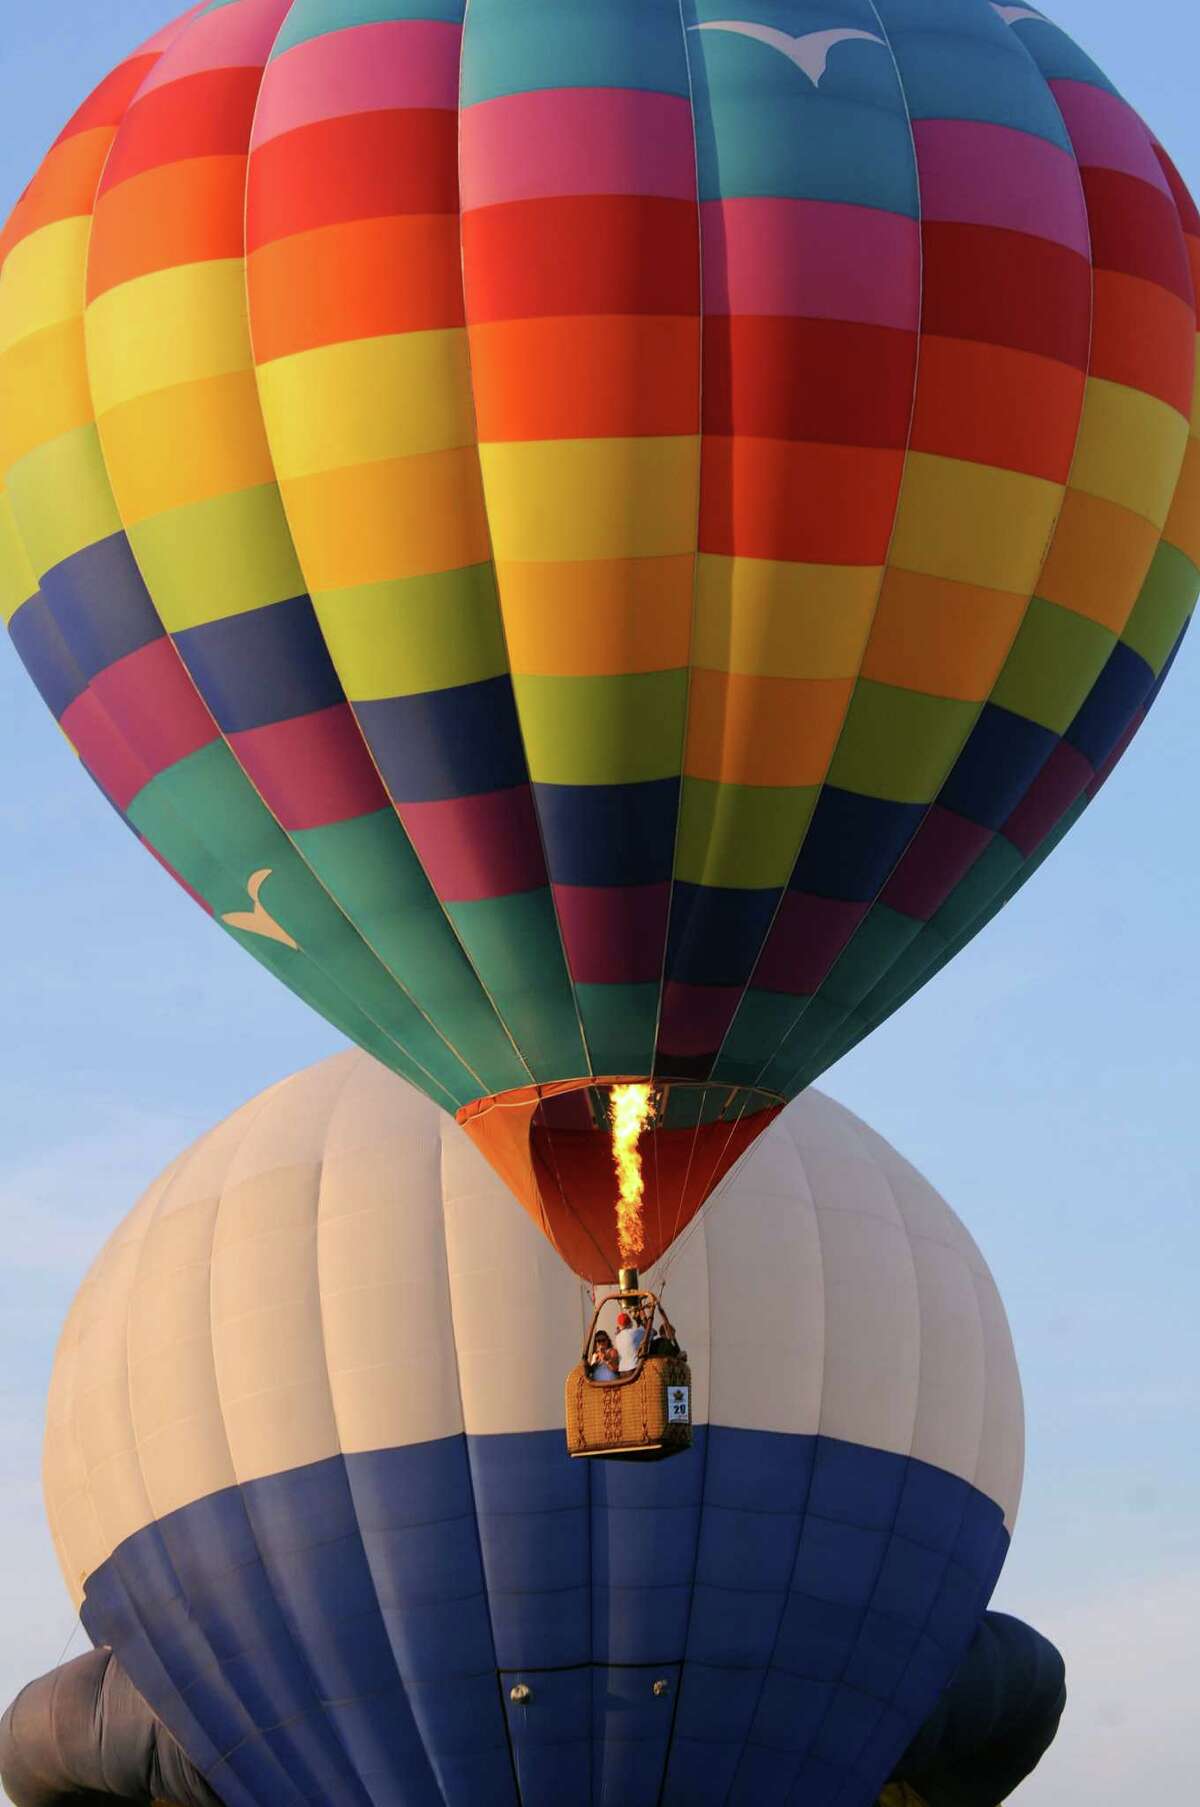 Hot air balloons lift off during the Adirondack Balloon Festival on Friday, Sept. 18, 2015, at Floyd Bennett Memorial Airport in Queensbury, N.Y. (Cindy Schultz / Times Union)